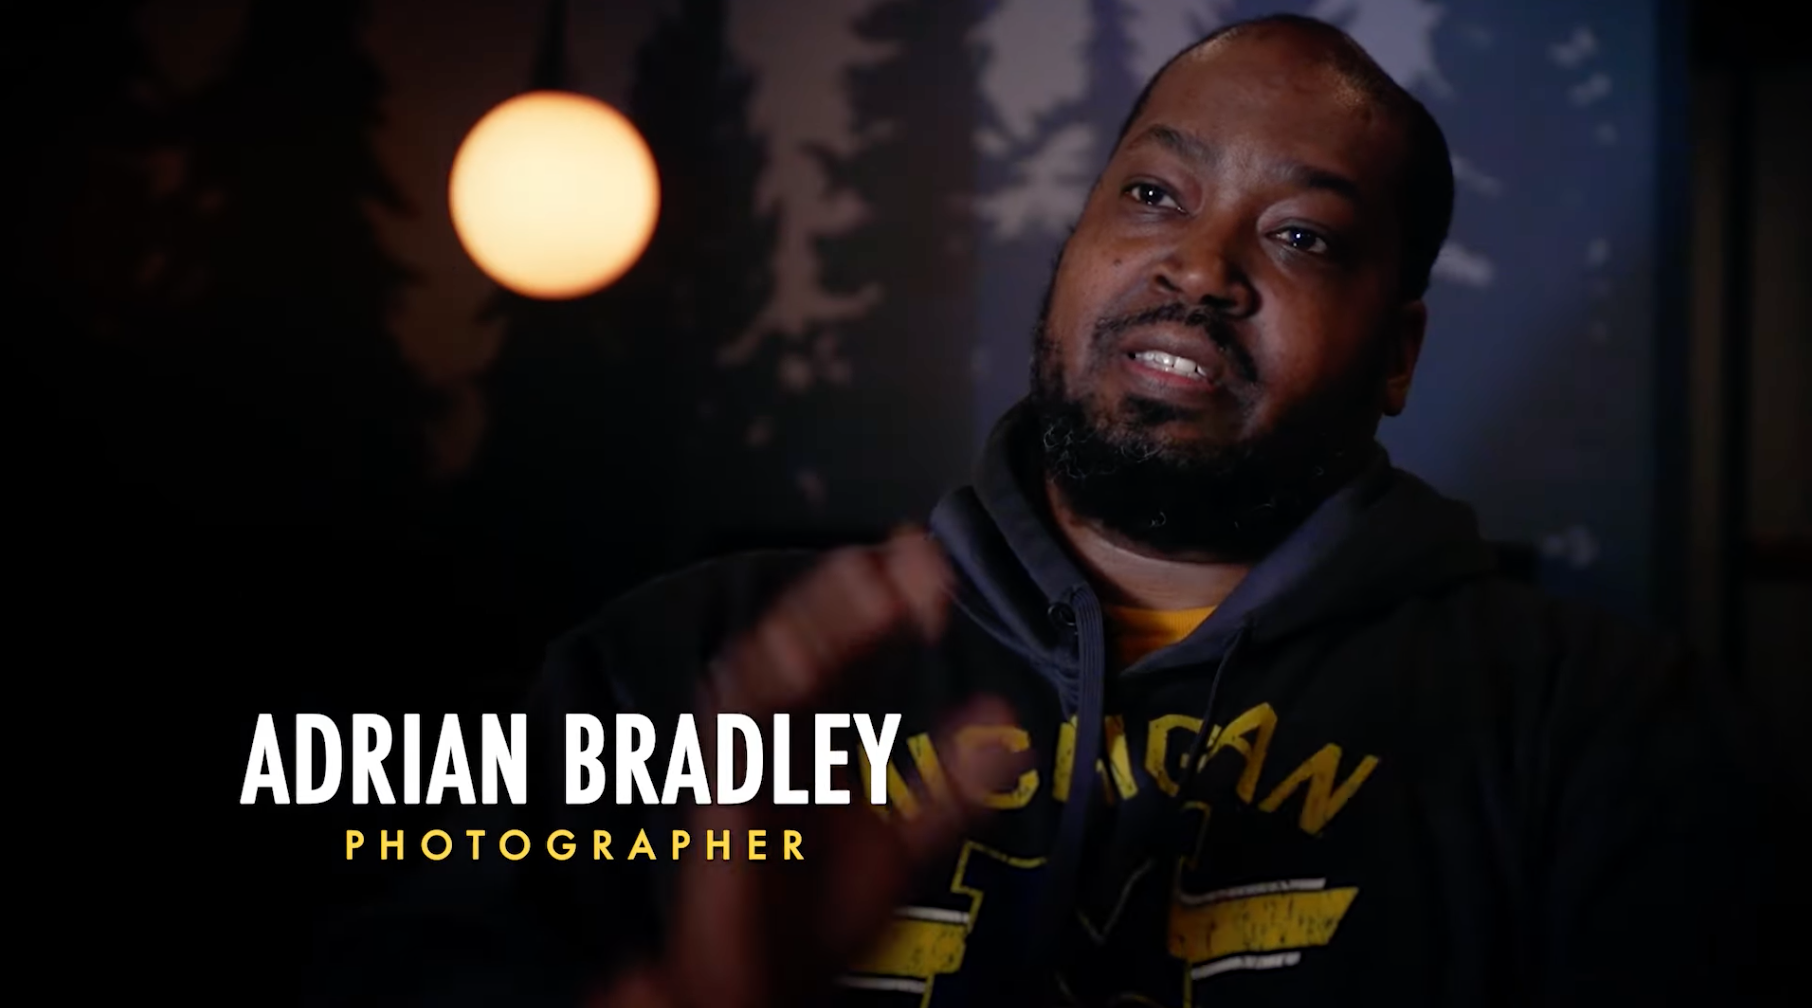 Load video: Adrian Bradley Photography was featured in this video in April 2022